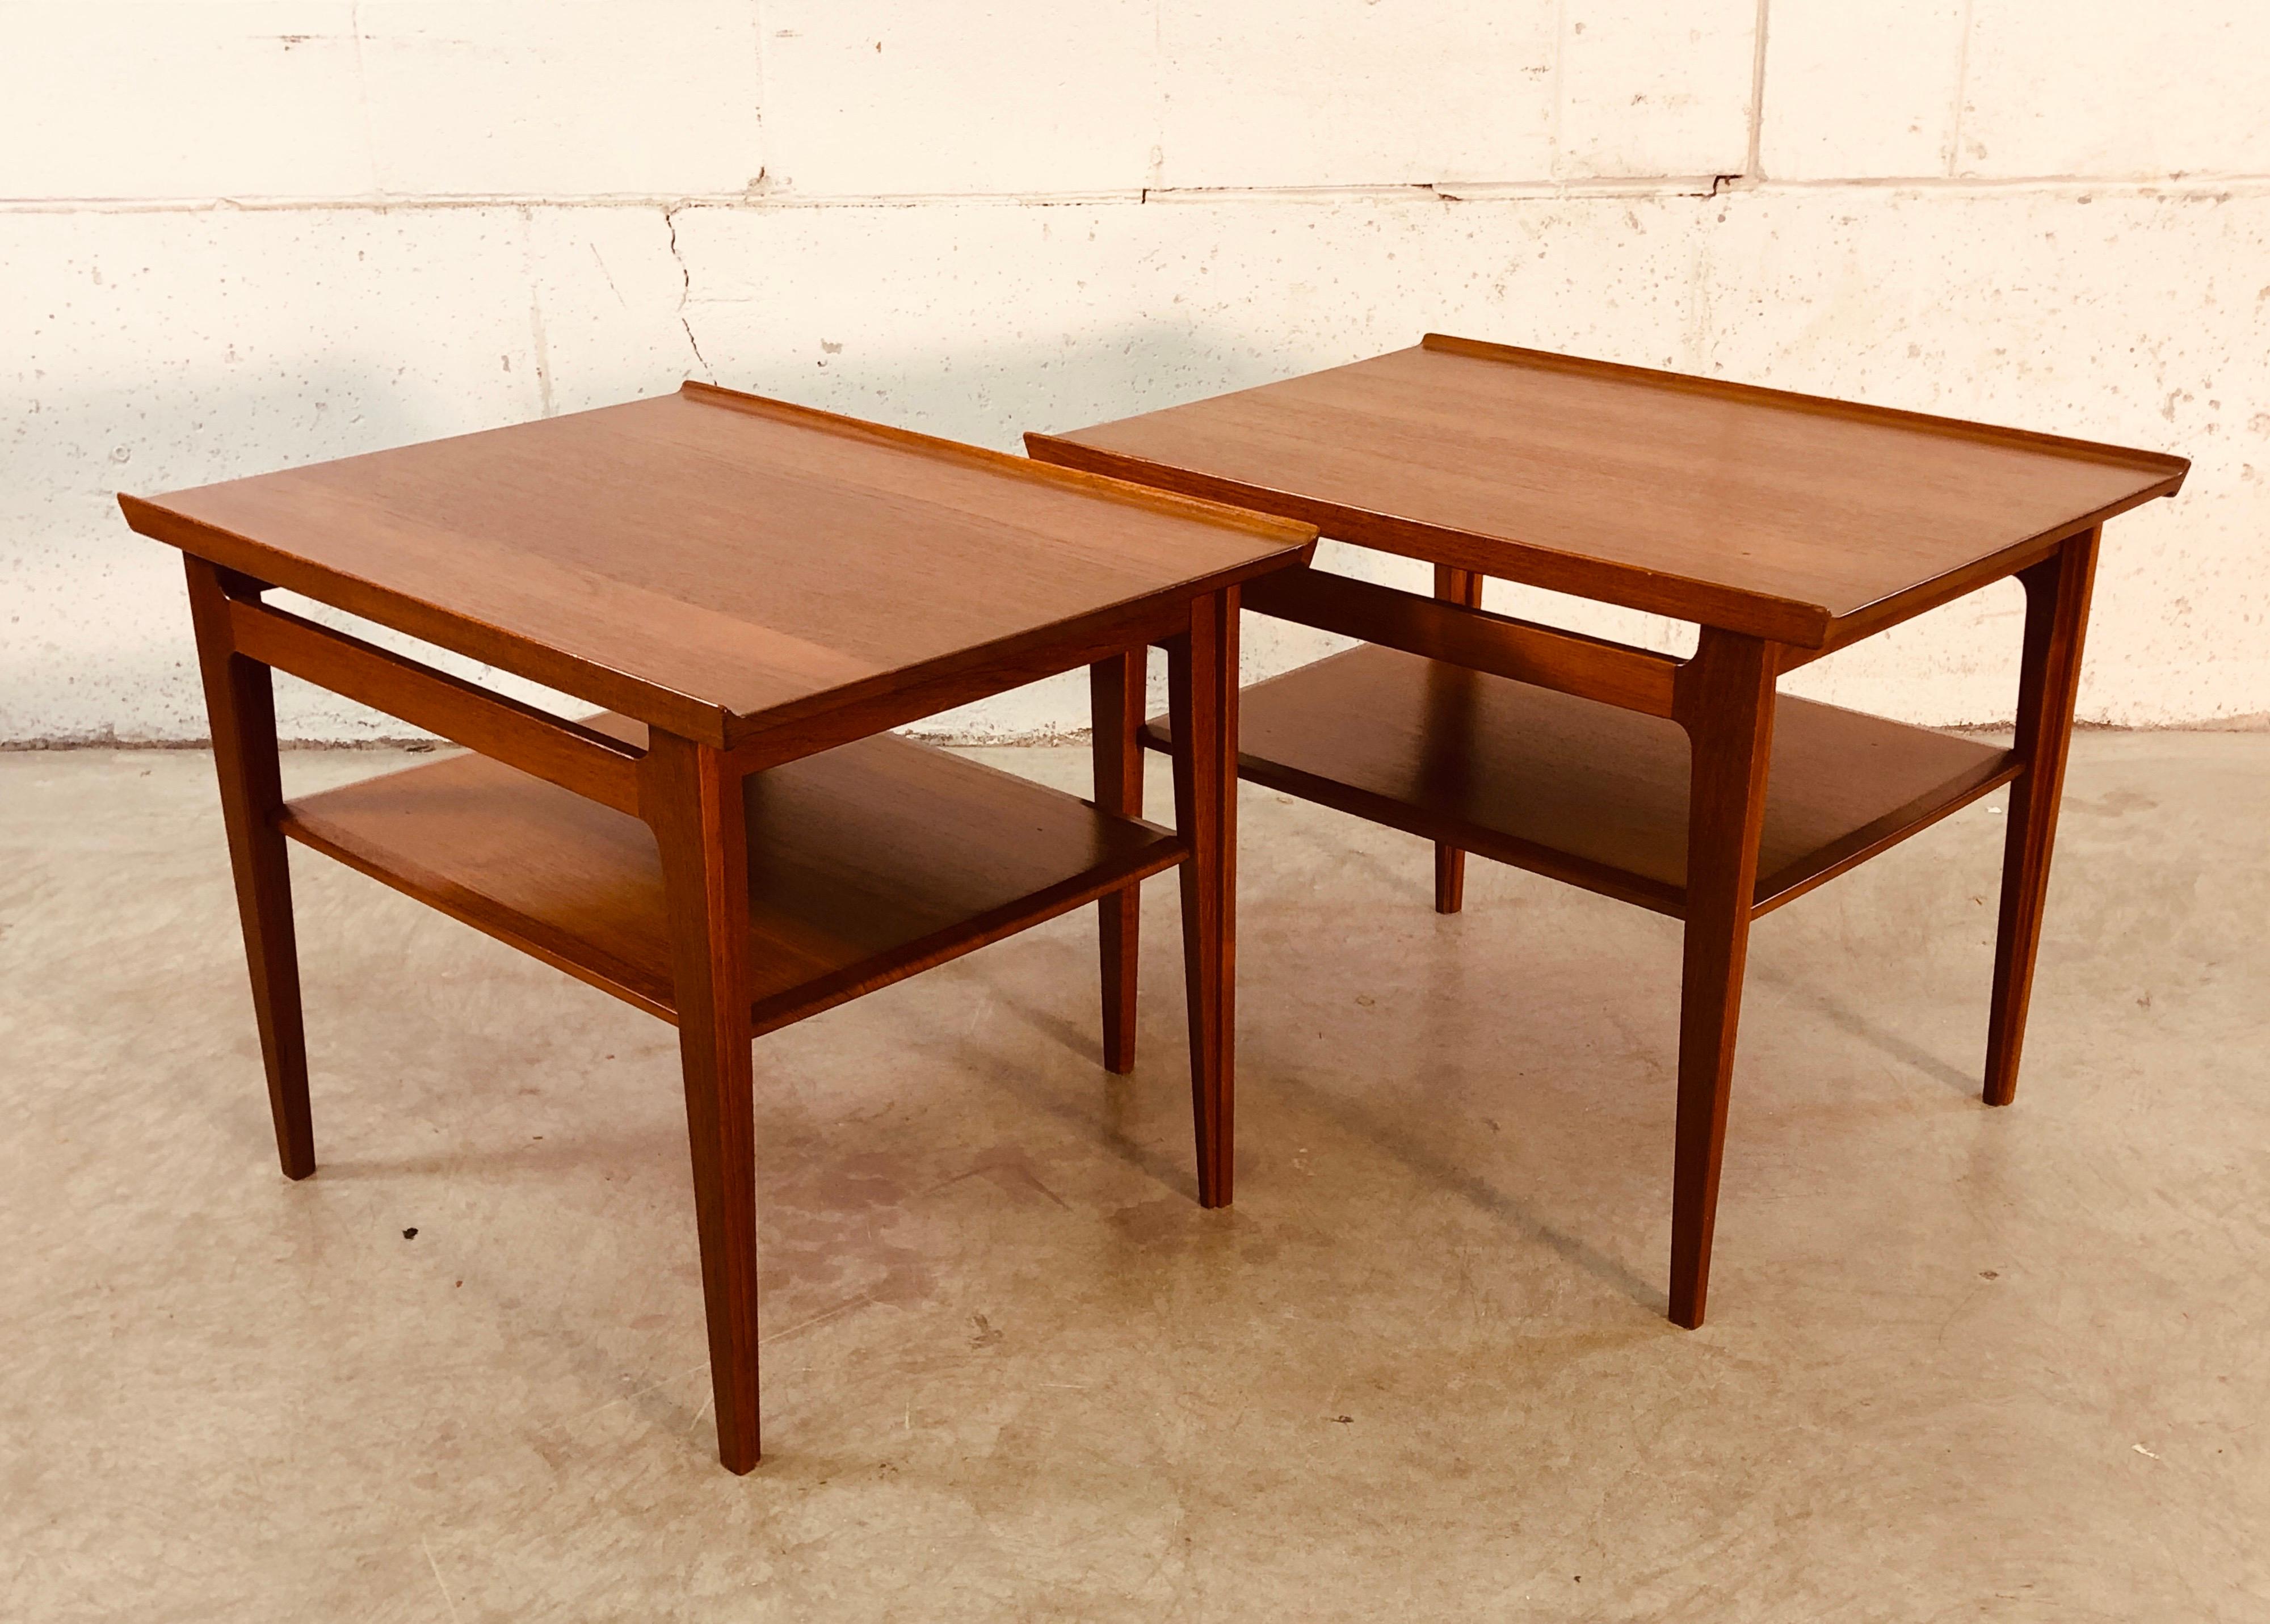 Vintage Danish modern pair of solid teak side tables designed by Finn Juhl for France & Sons, 1950s. These tables are from the 500 series. They are in very good condition with a couple of spots on the top of the tables. The tables are sturdy and in